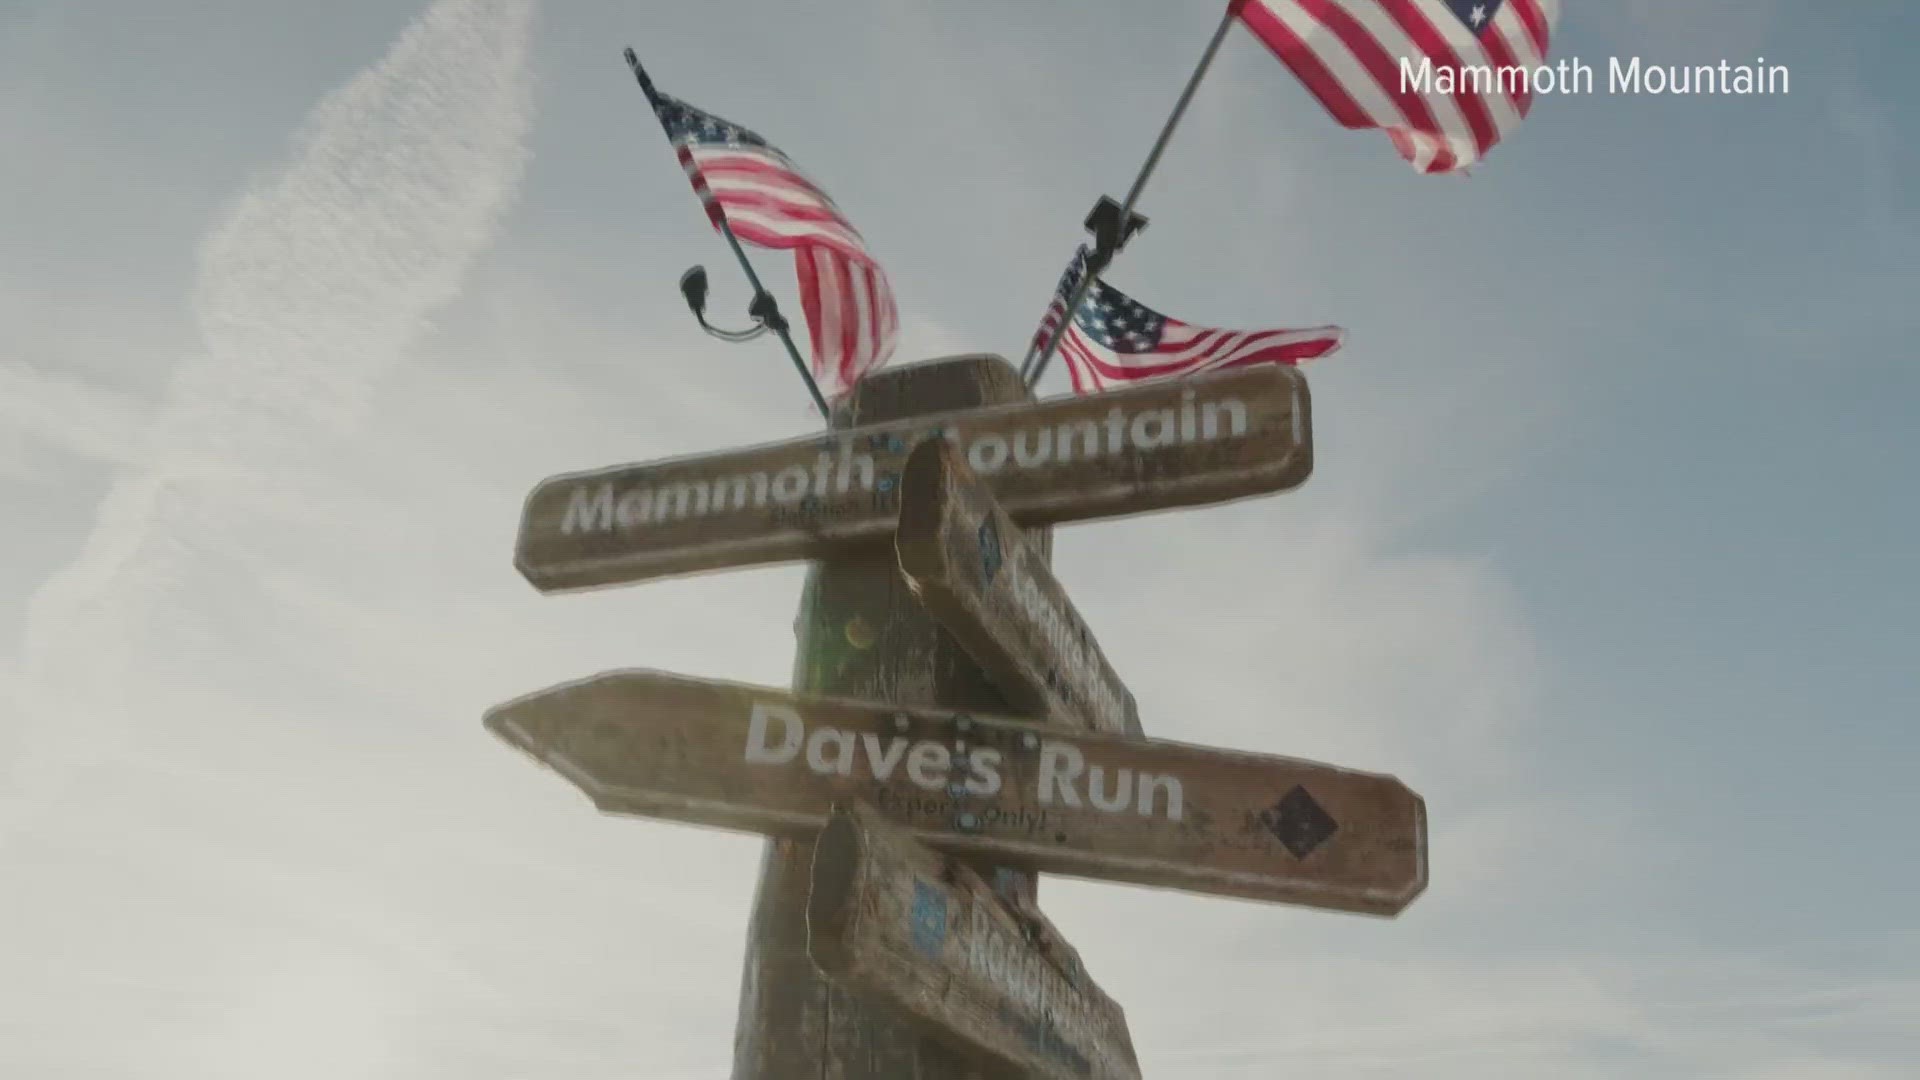 Folks are headed to Mammoth Mountain to ski their way through the Fourth of July this year...  Even as temperatures reach triple digits in Northern California.